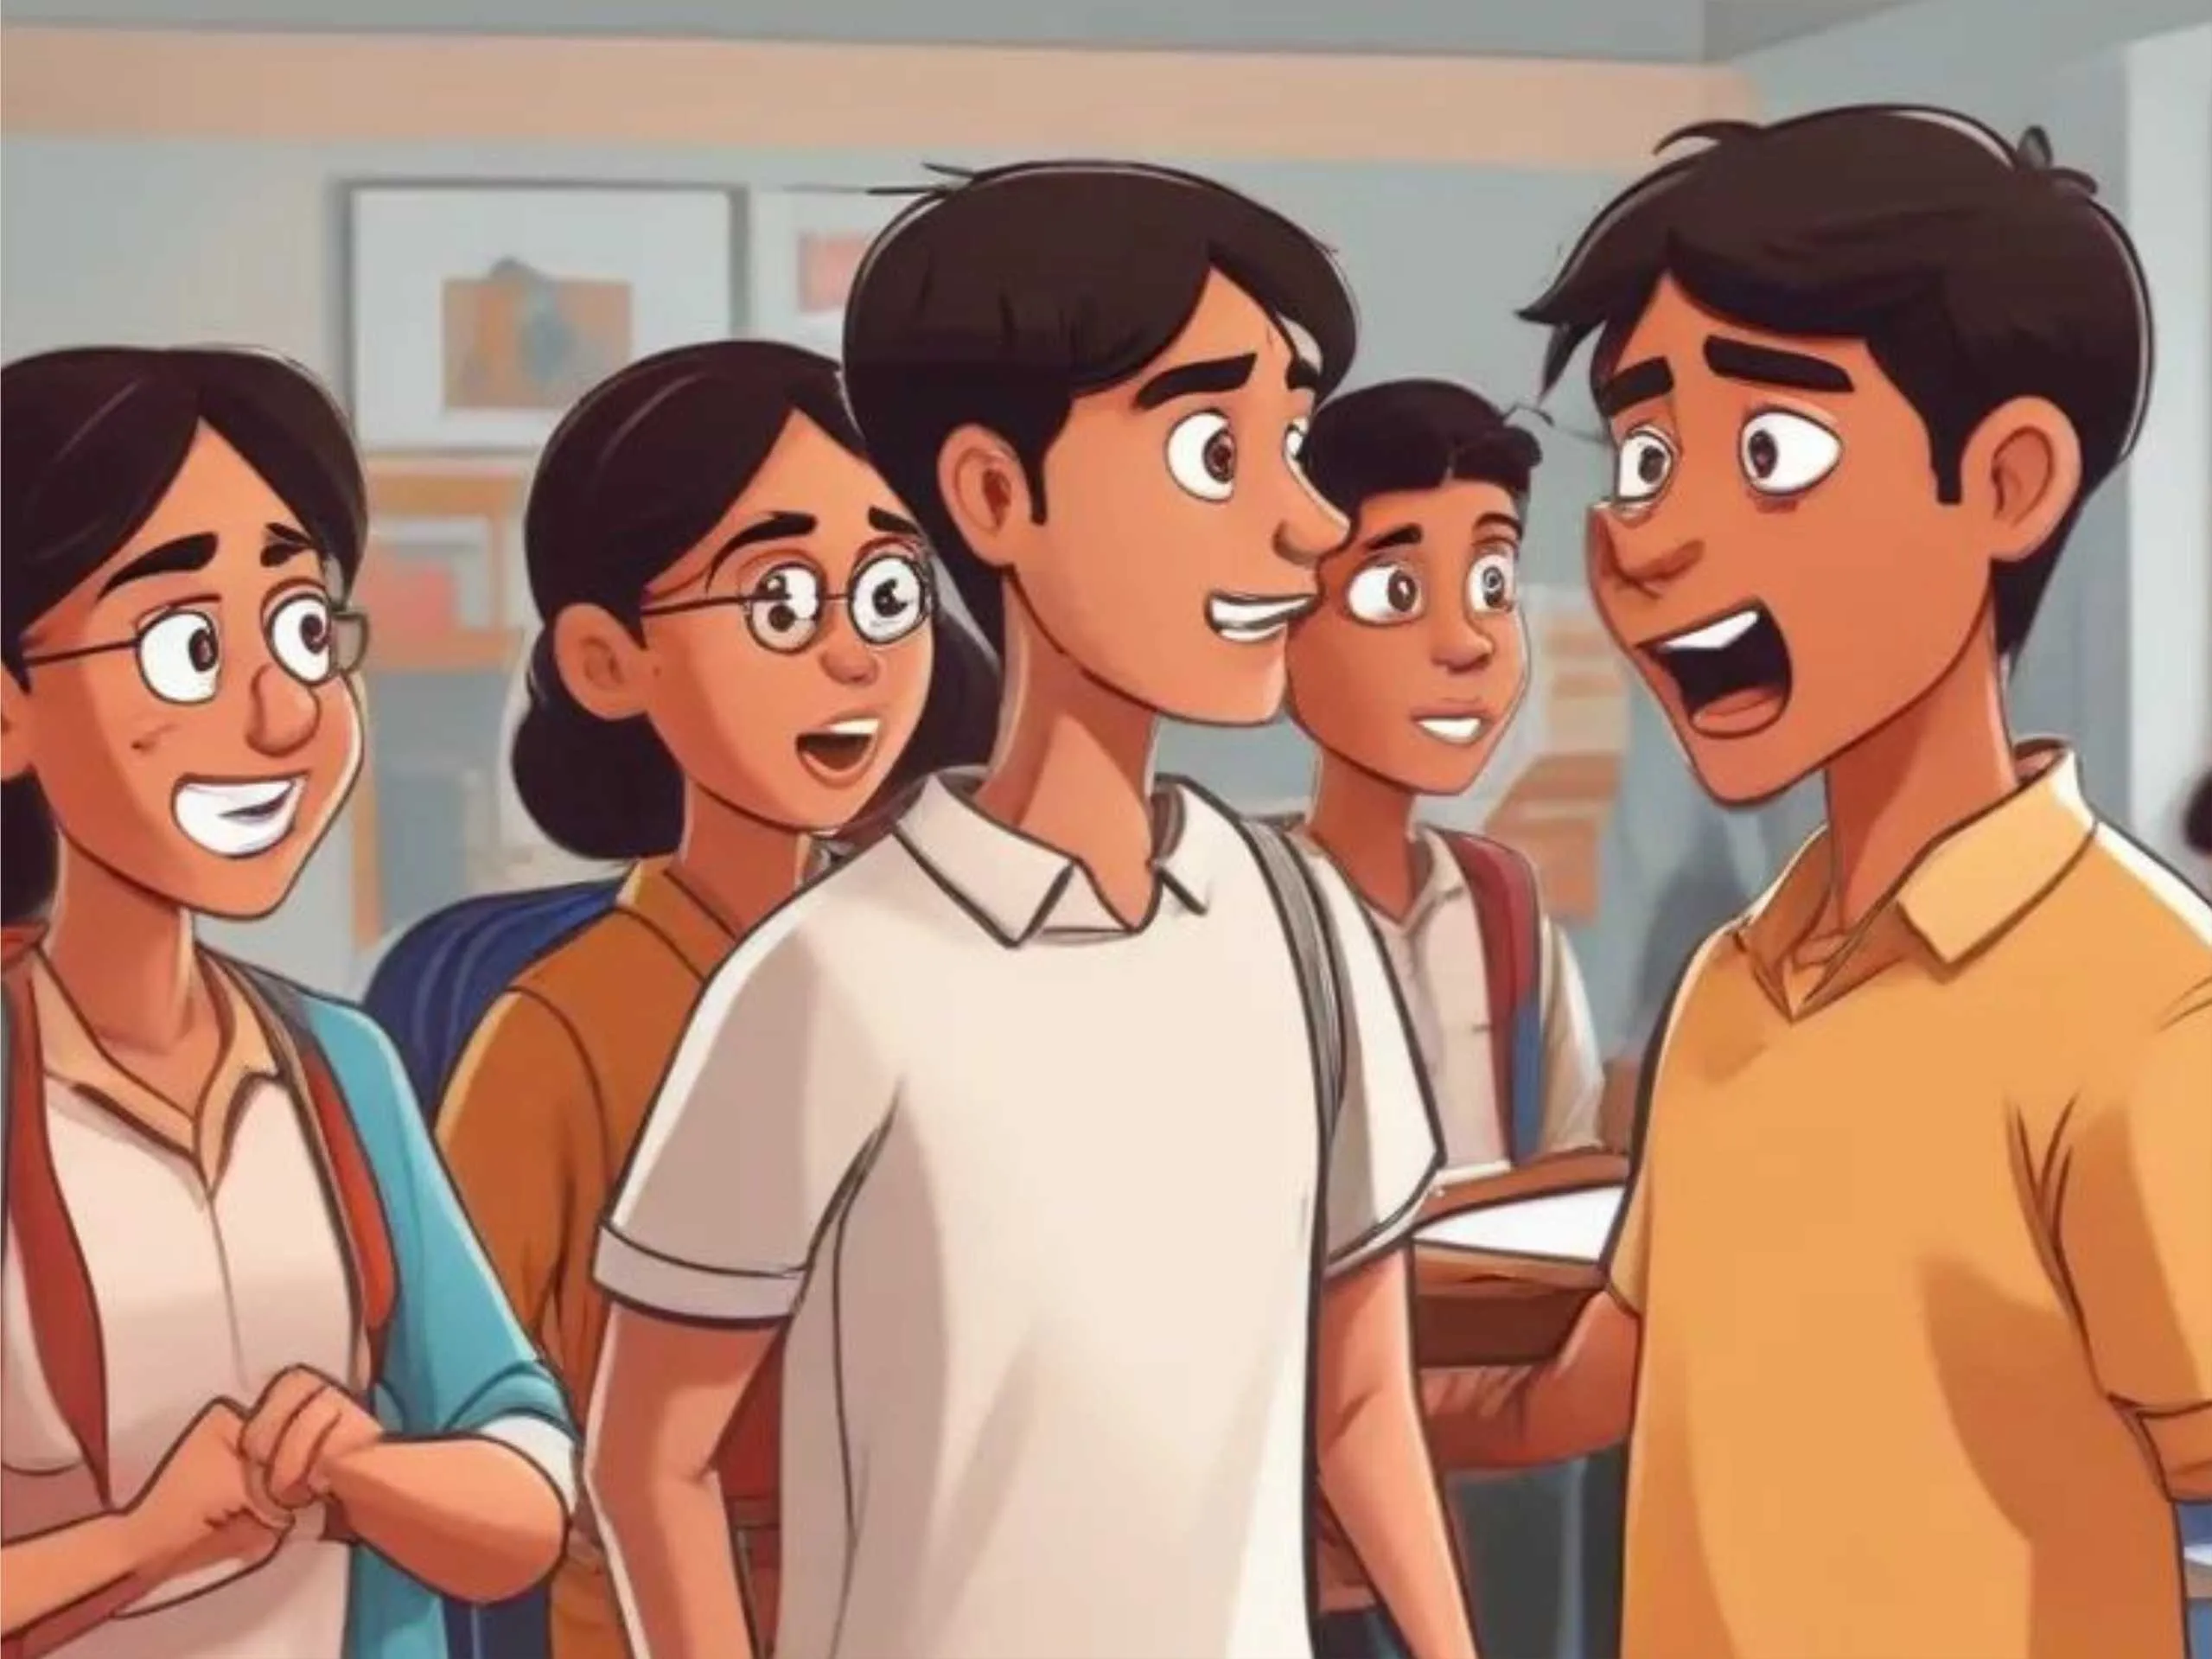 Students in class cartoon image